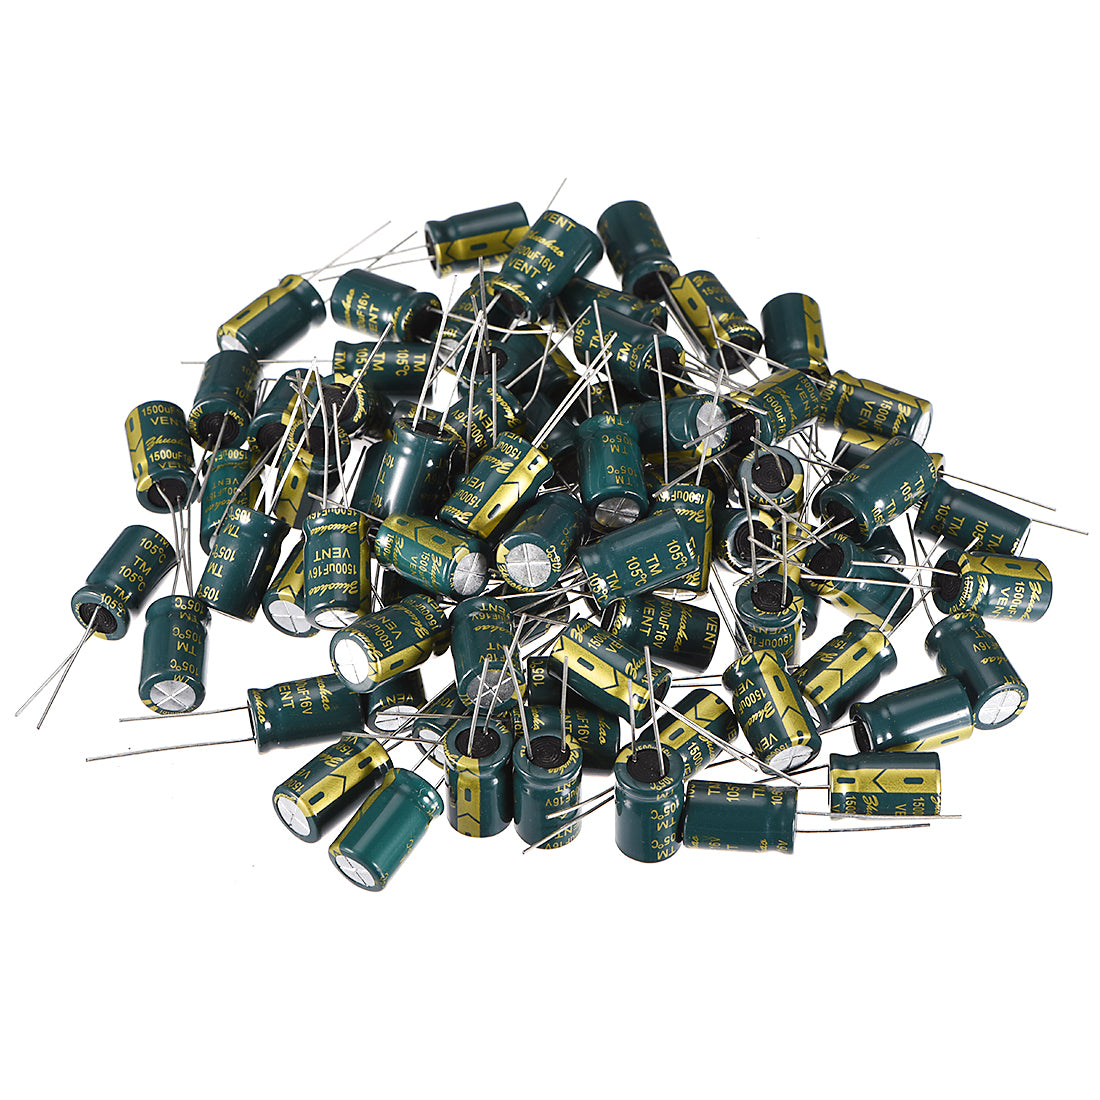 uxcell Uxcell Aluminum Radial Electrolytic Capacitor Low ESR Green with 1500UF 16V 105 Celsius Life 3000H 10 x 17 mm High Ripple Current,Low Impedance 75pcs